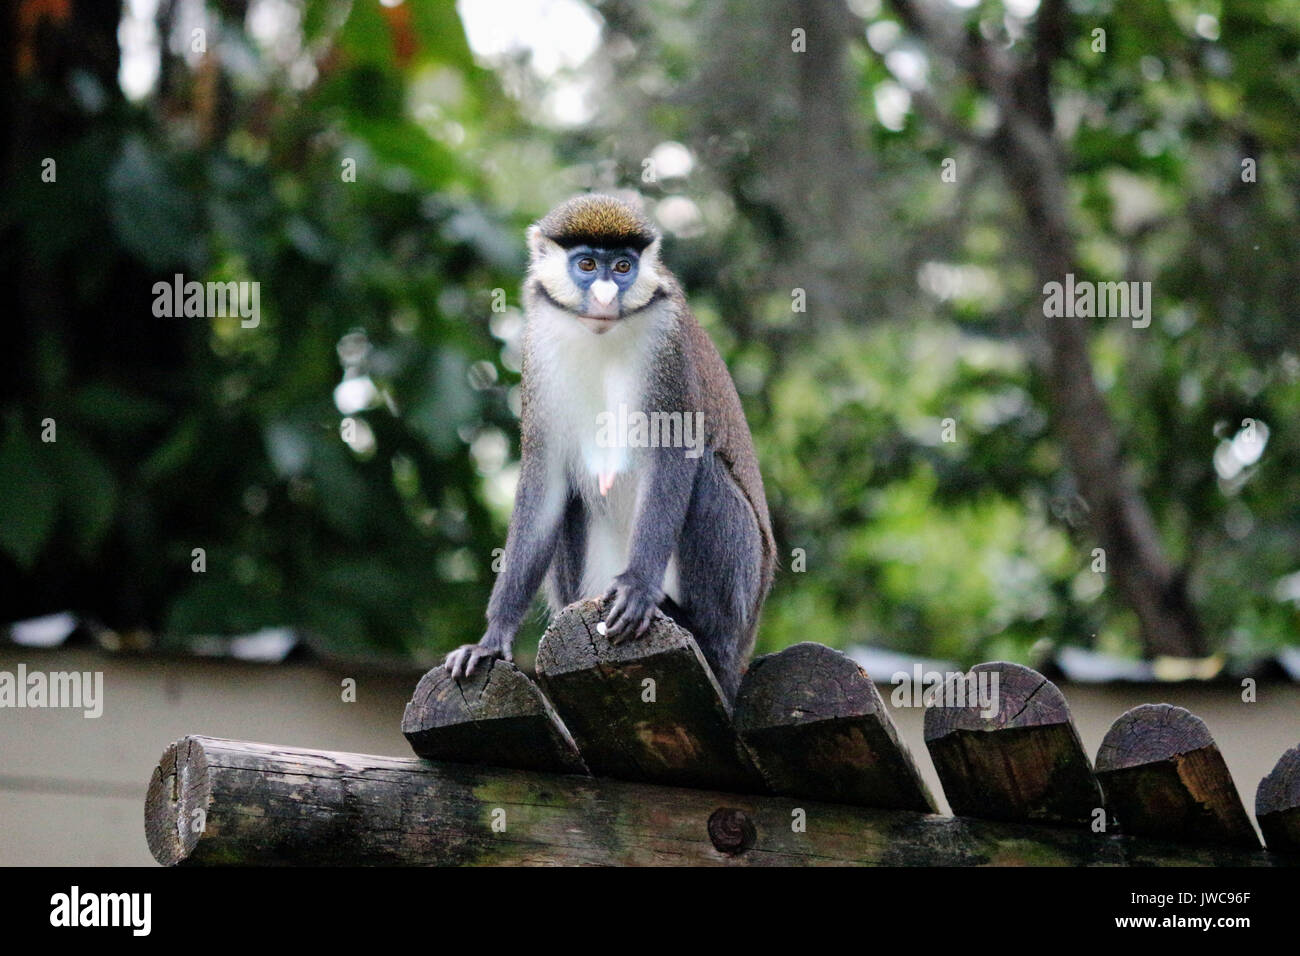 A Red Tailed Monkey Sits on His Platform . Stock Photo